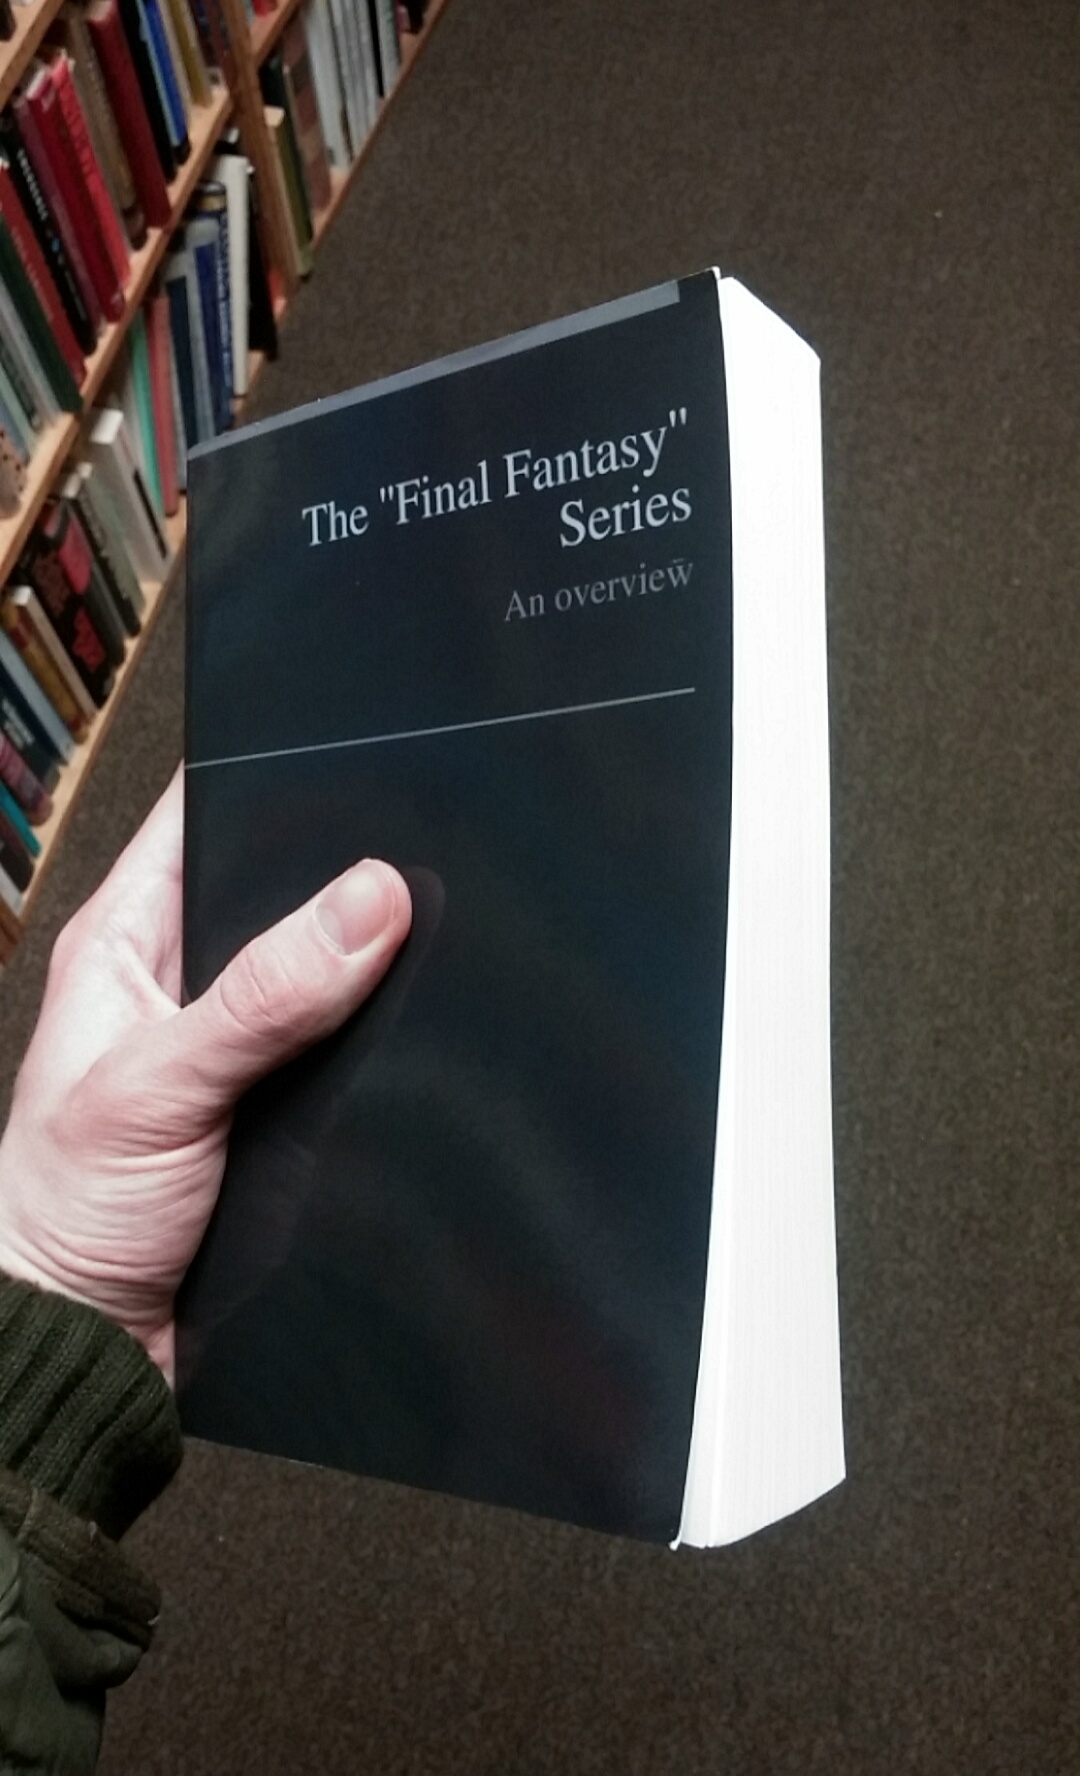 book - The "Final Fantasy" Series An overview